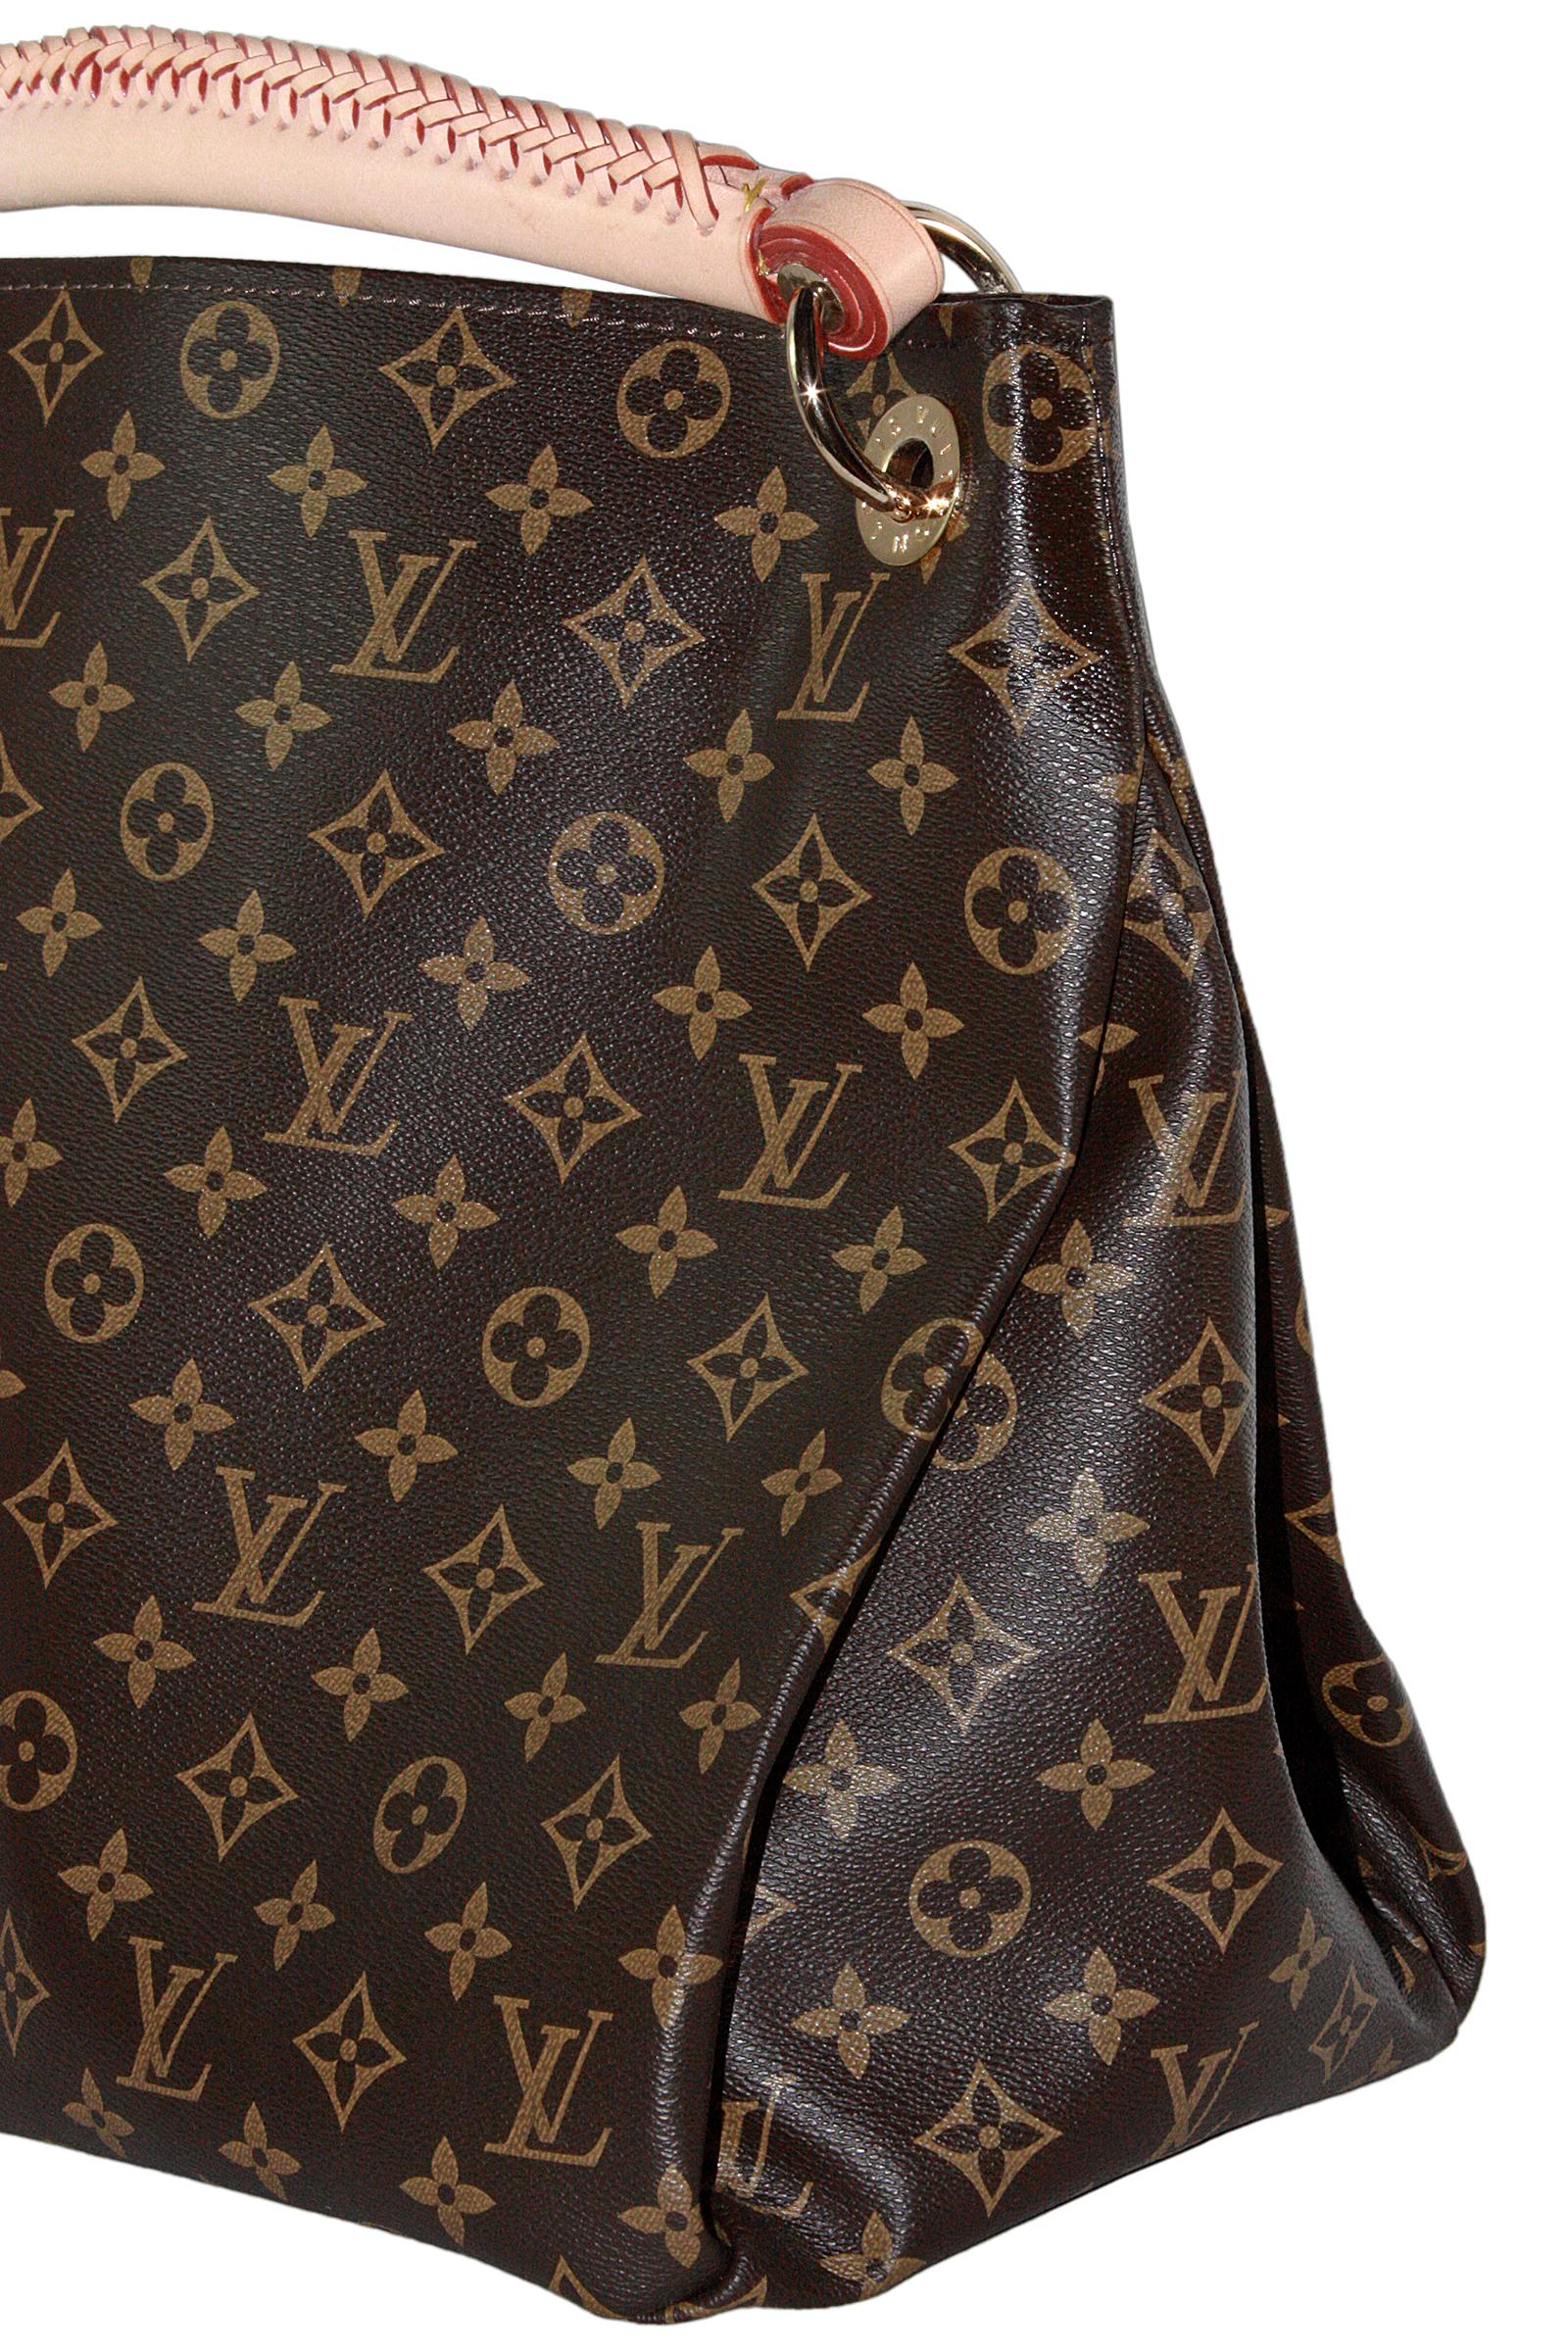 Louis Vuitton Artsy Hobo Braided Brown Leather Monogram Shoulder Bag In Good Condition In Los Angeles, CA